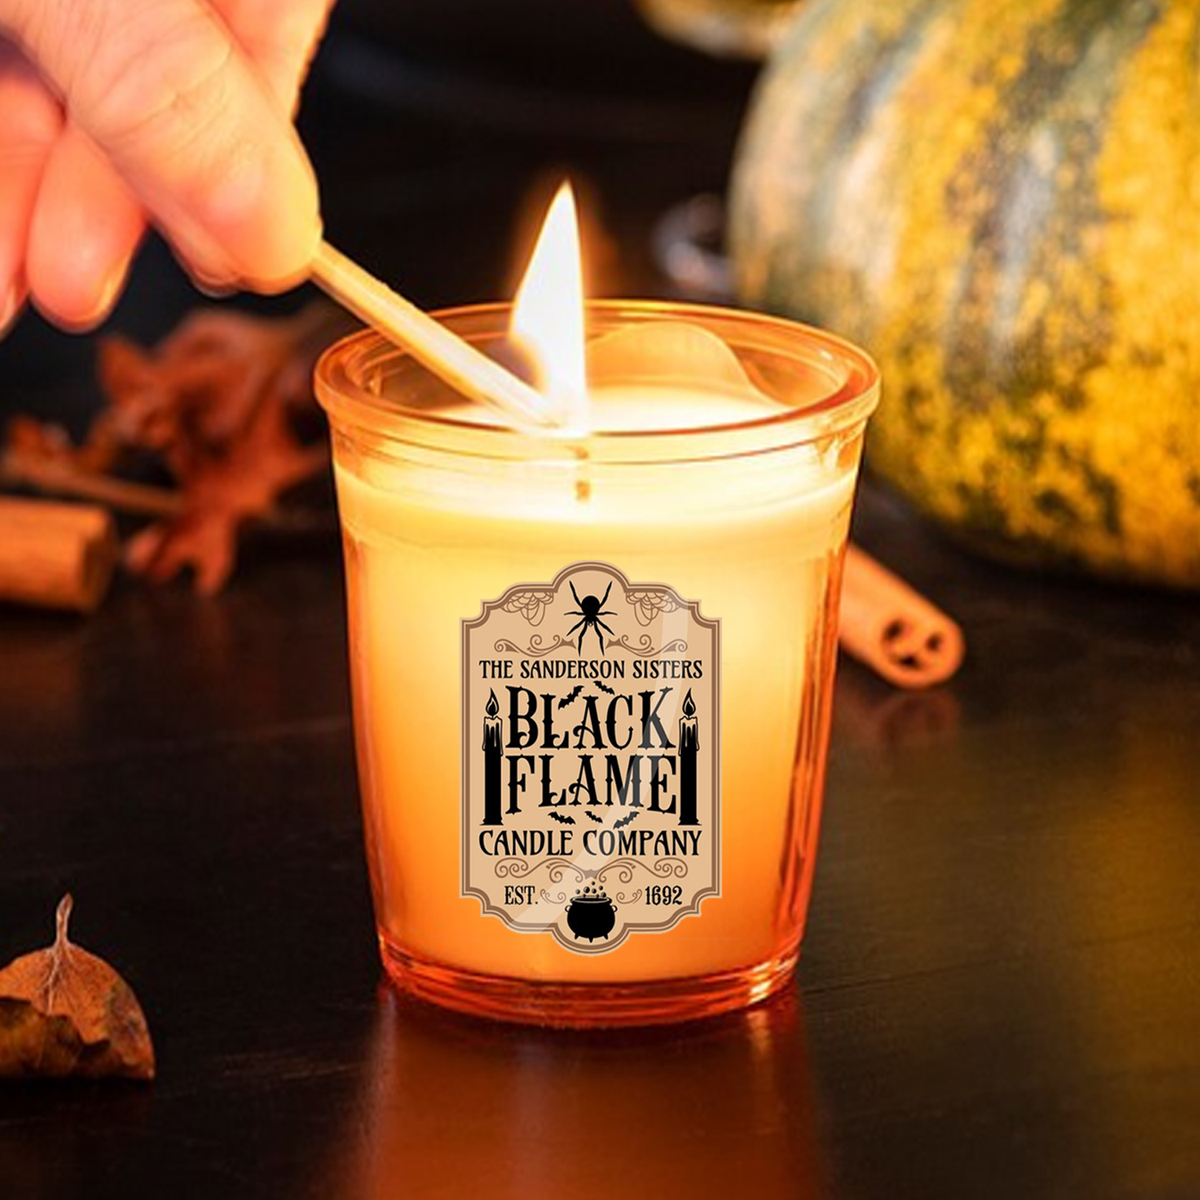 Black Flame Candle - Halloween Pumpkin Spice Scented Candle